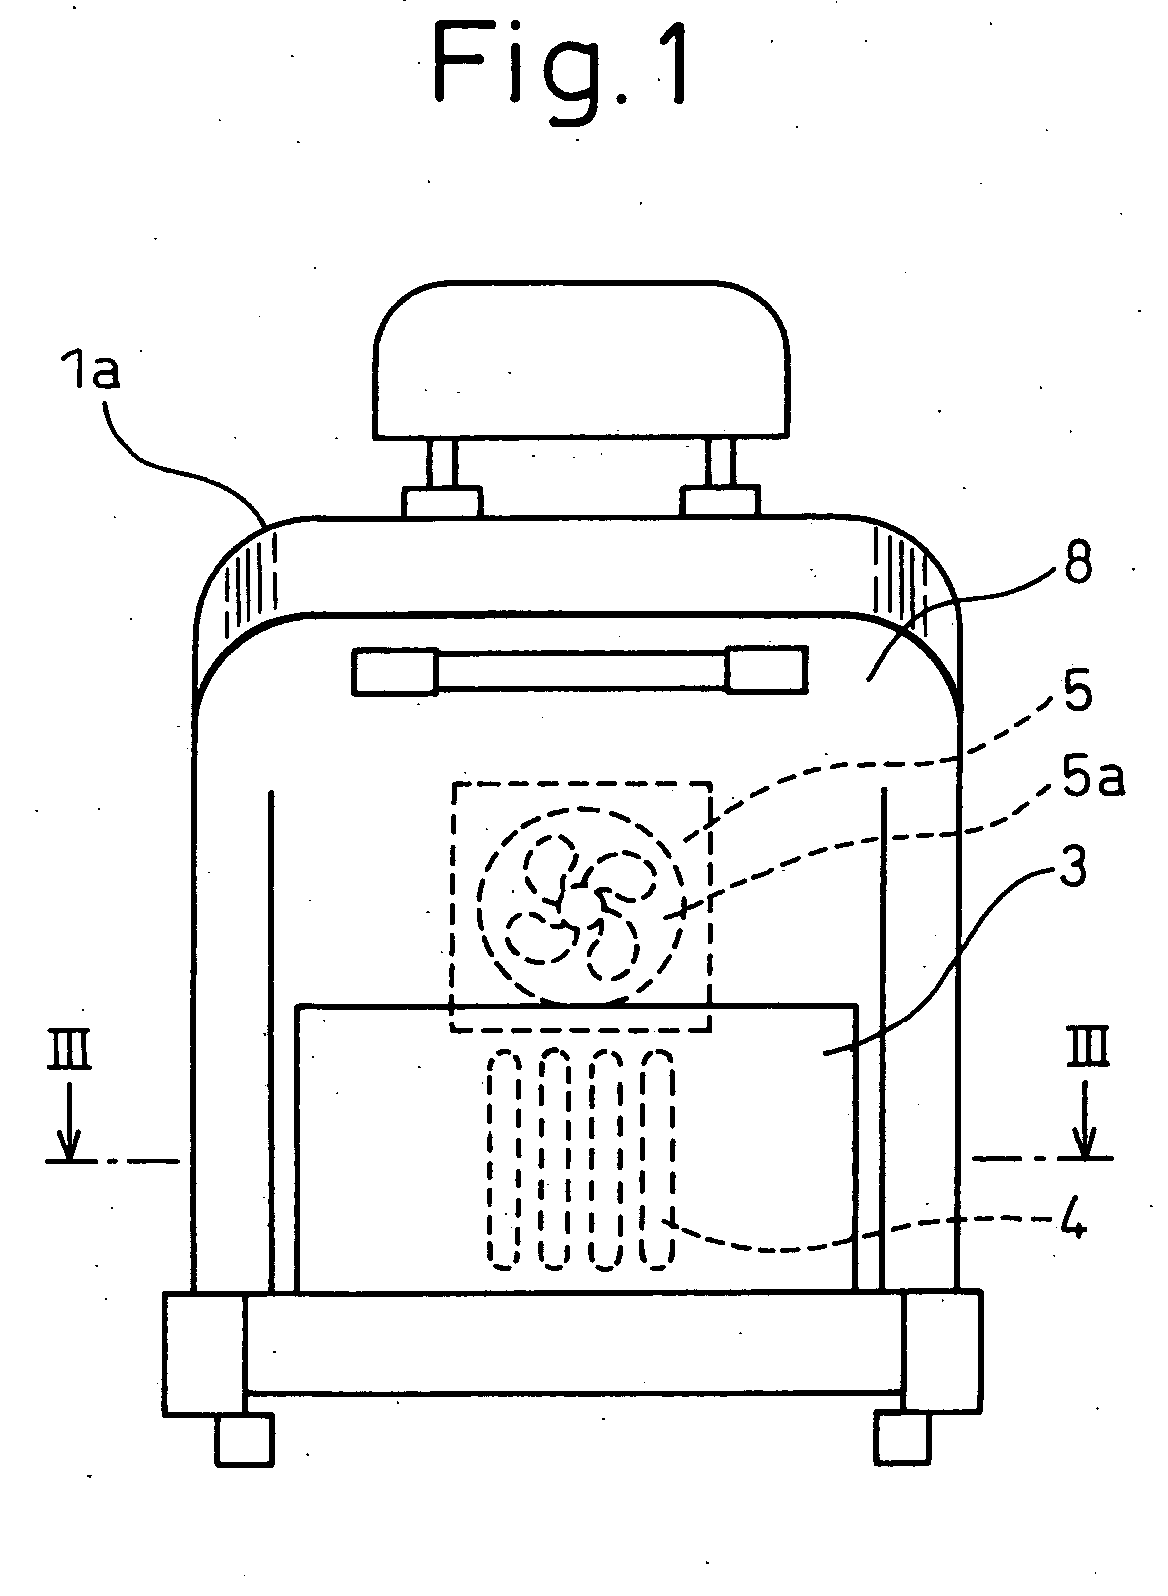 Air flow device incorporated into seat for a vehicle